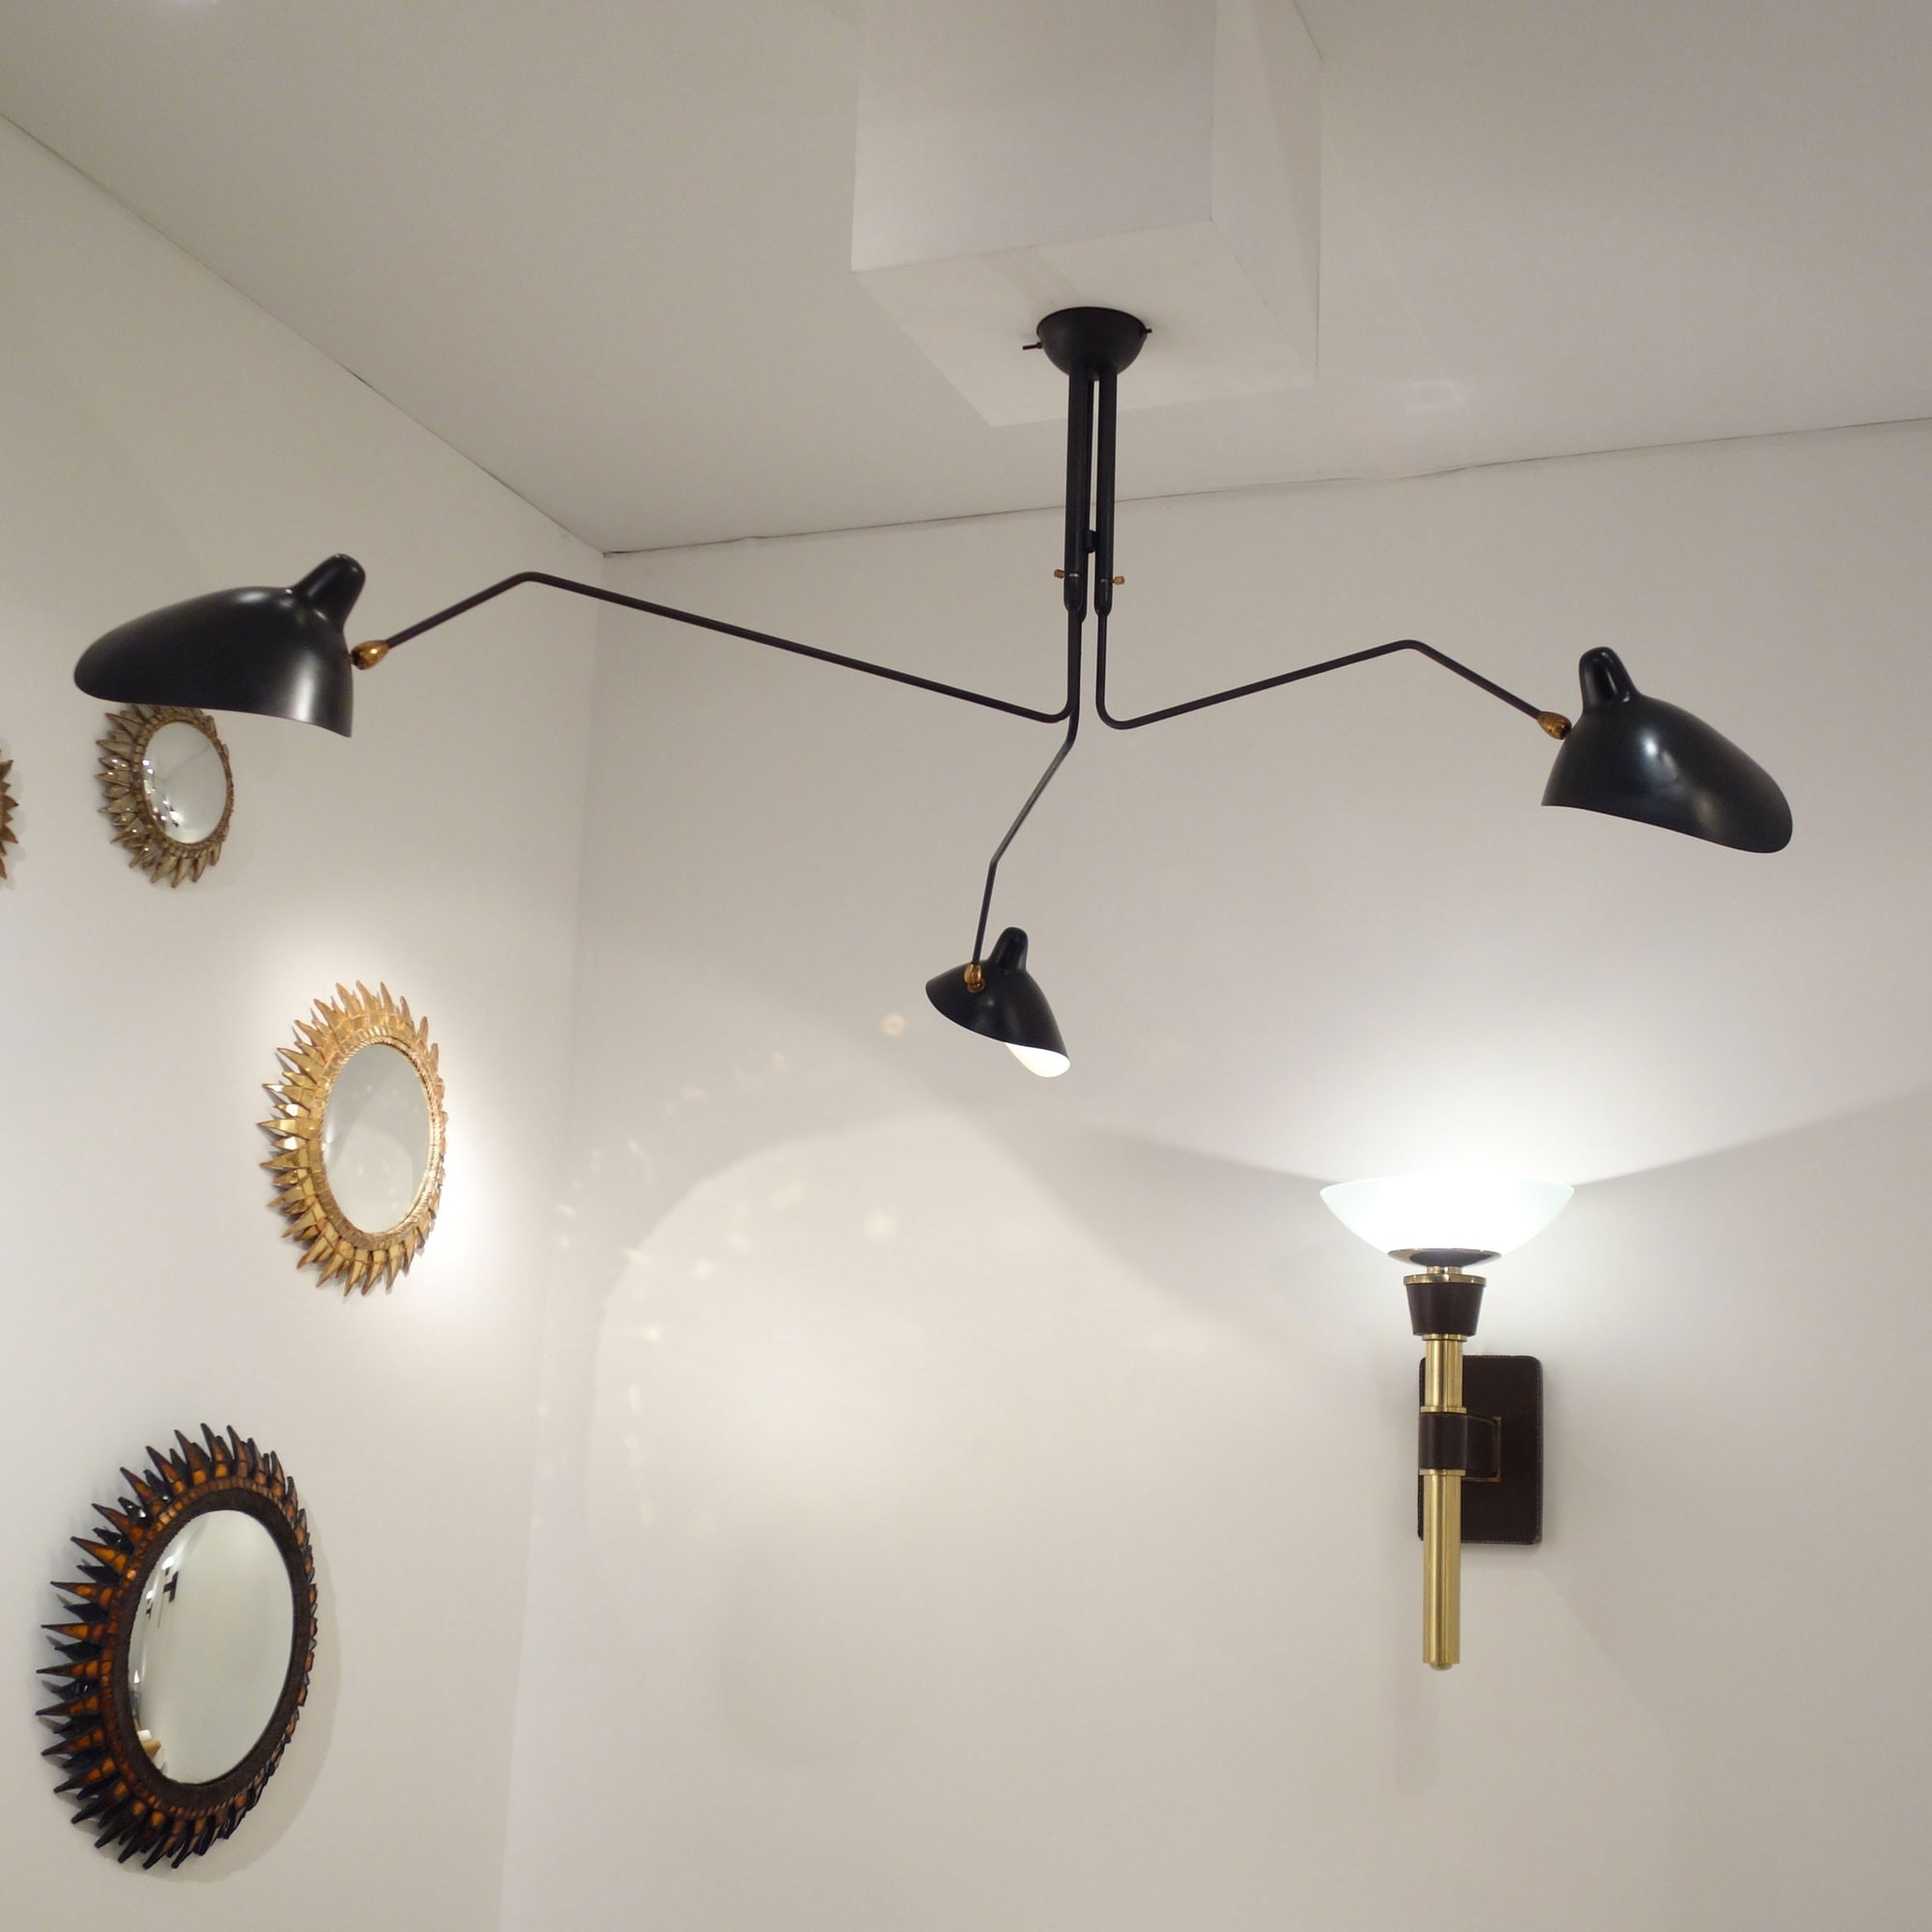 Serge Mouille, ceiling lamp with three pivoting arms, vue 02